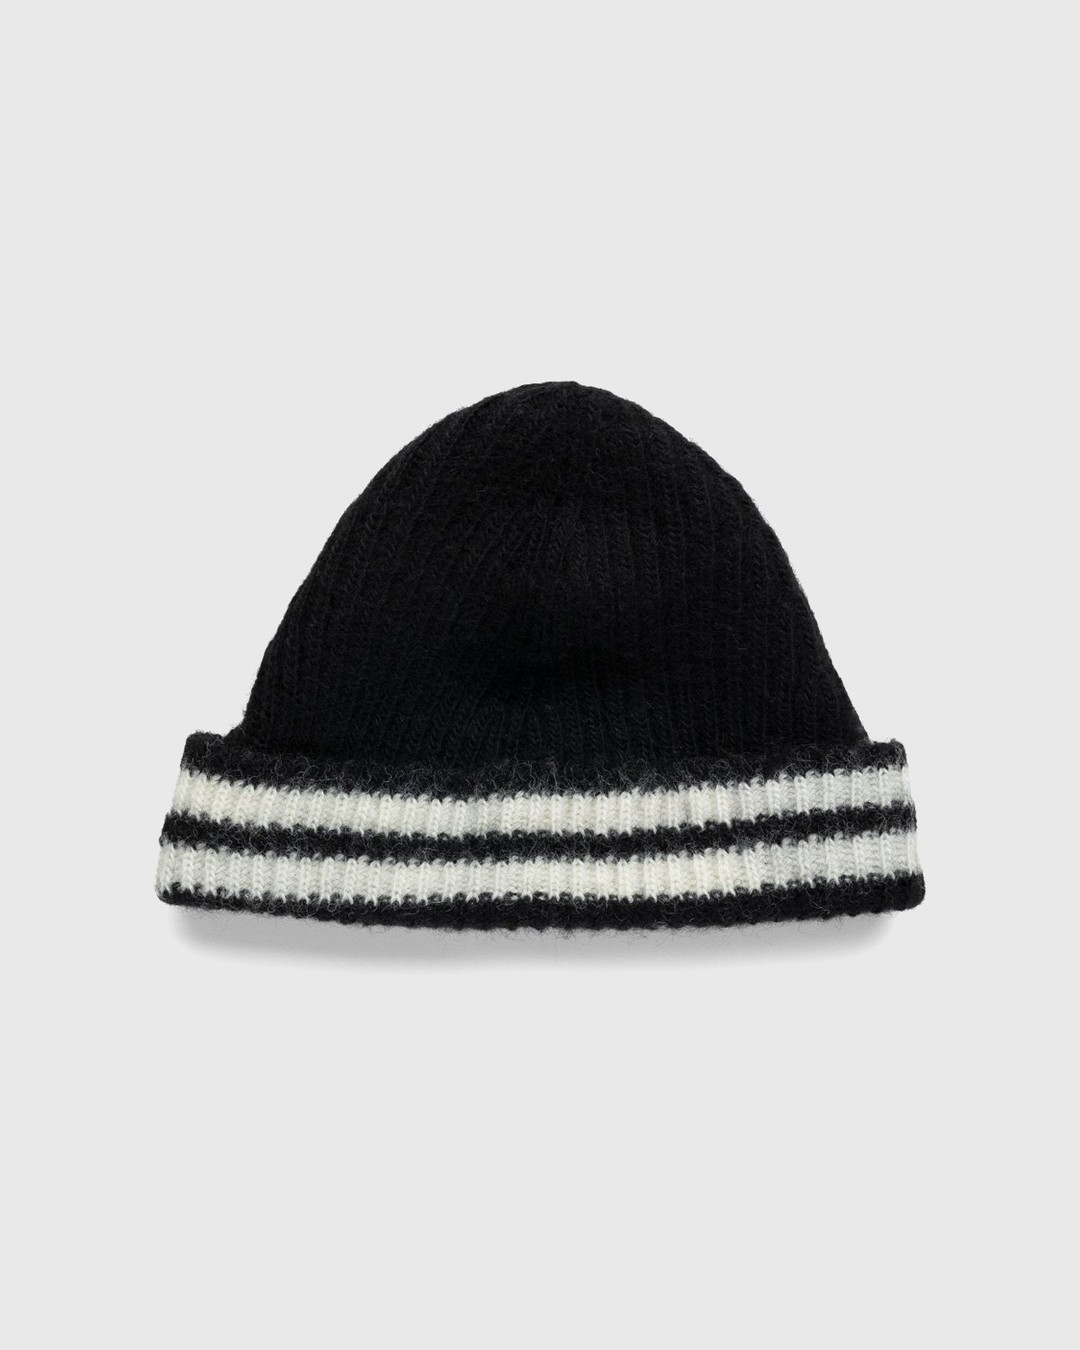 Our Legacy – Knitted Stripe Hat Black Ivory Wool - Beanies - Black - Image 1